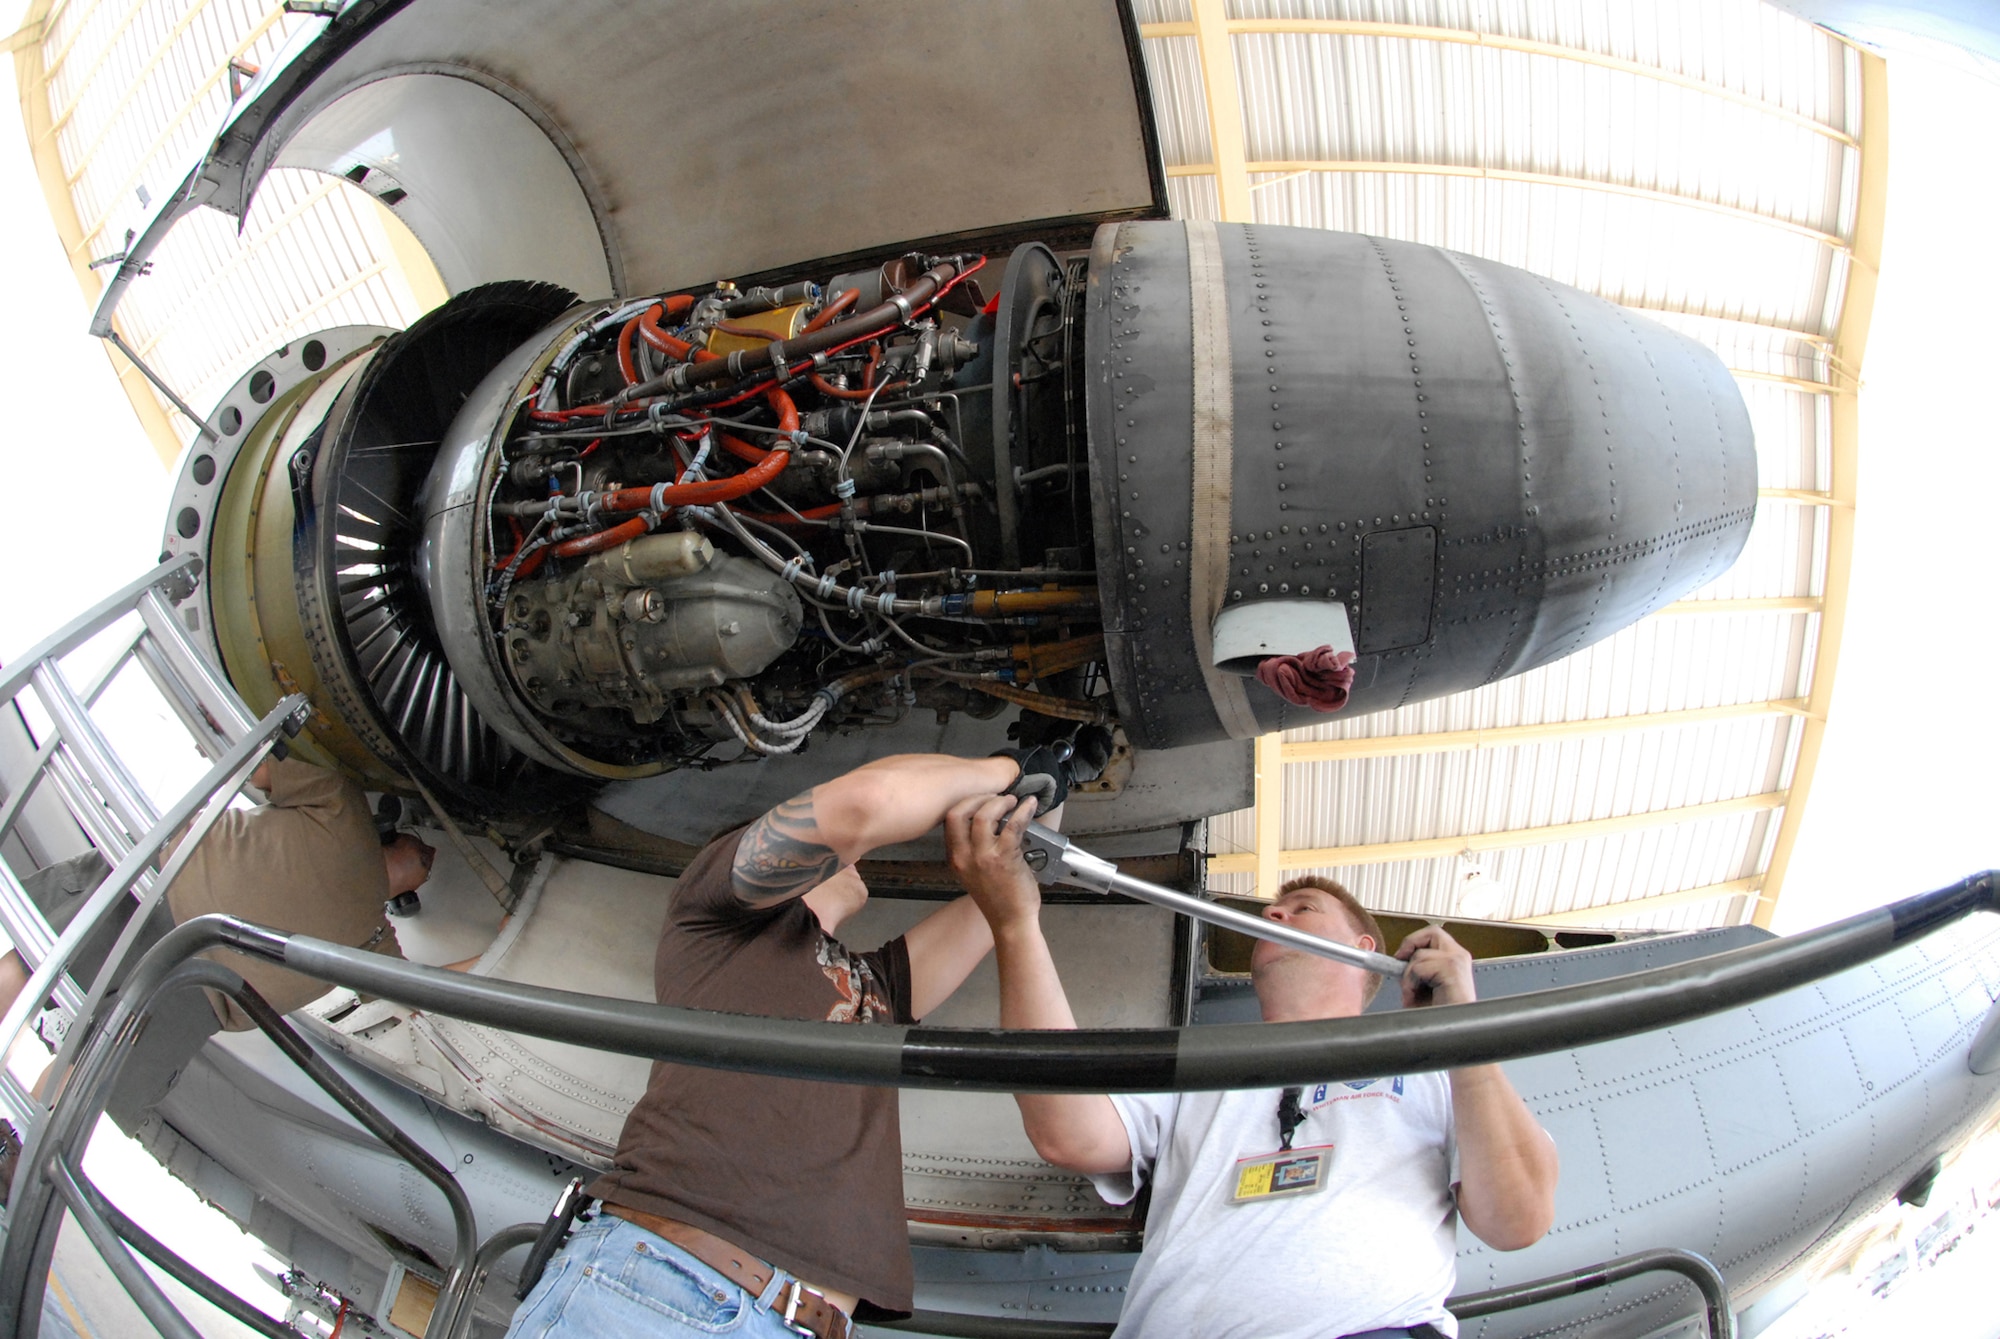 David Greenburg and Bob Boye loosen a bolt to remove a TF-34-100A turbo-fan engine from an A-10 Thunderbolt II at Whiteman Air Force Base, Mo., June 2, 2009, while Tony Divito, left, checks a safety strap.  This engine set a longevity record in the 442nd Fighter Wing after being installed on the same aircraft for 10 years and accumulated 3,464.4 hours of operating time.  Mr. Boye and Mr. Greenberg are crew chiefs in the 442nd Aircraft Maintenance Squadron and Mr. Divito is an engine mechanic in the 442nd Maintenance Squadron.  All three are Air Reserve Technicians.  The 442nd is an Air Force Reserve unit based at Whiteman.  (U.S. Air Force photo/Master Sgt. Bill Huntington)